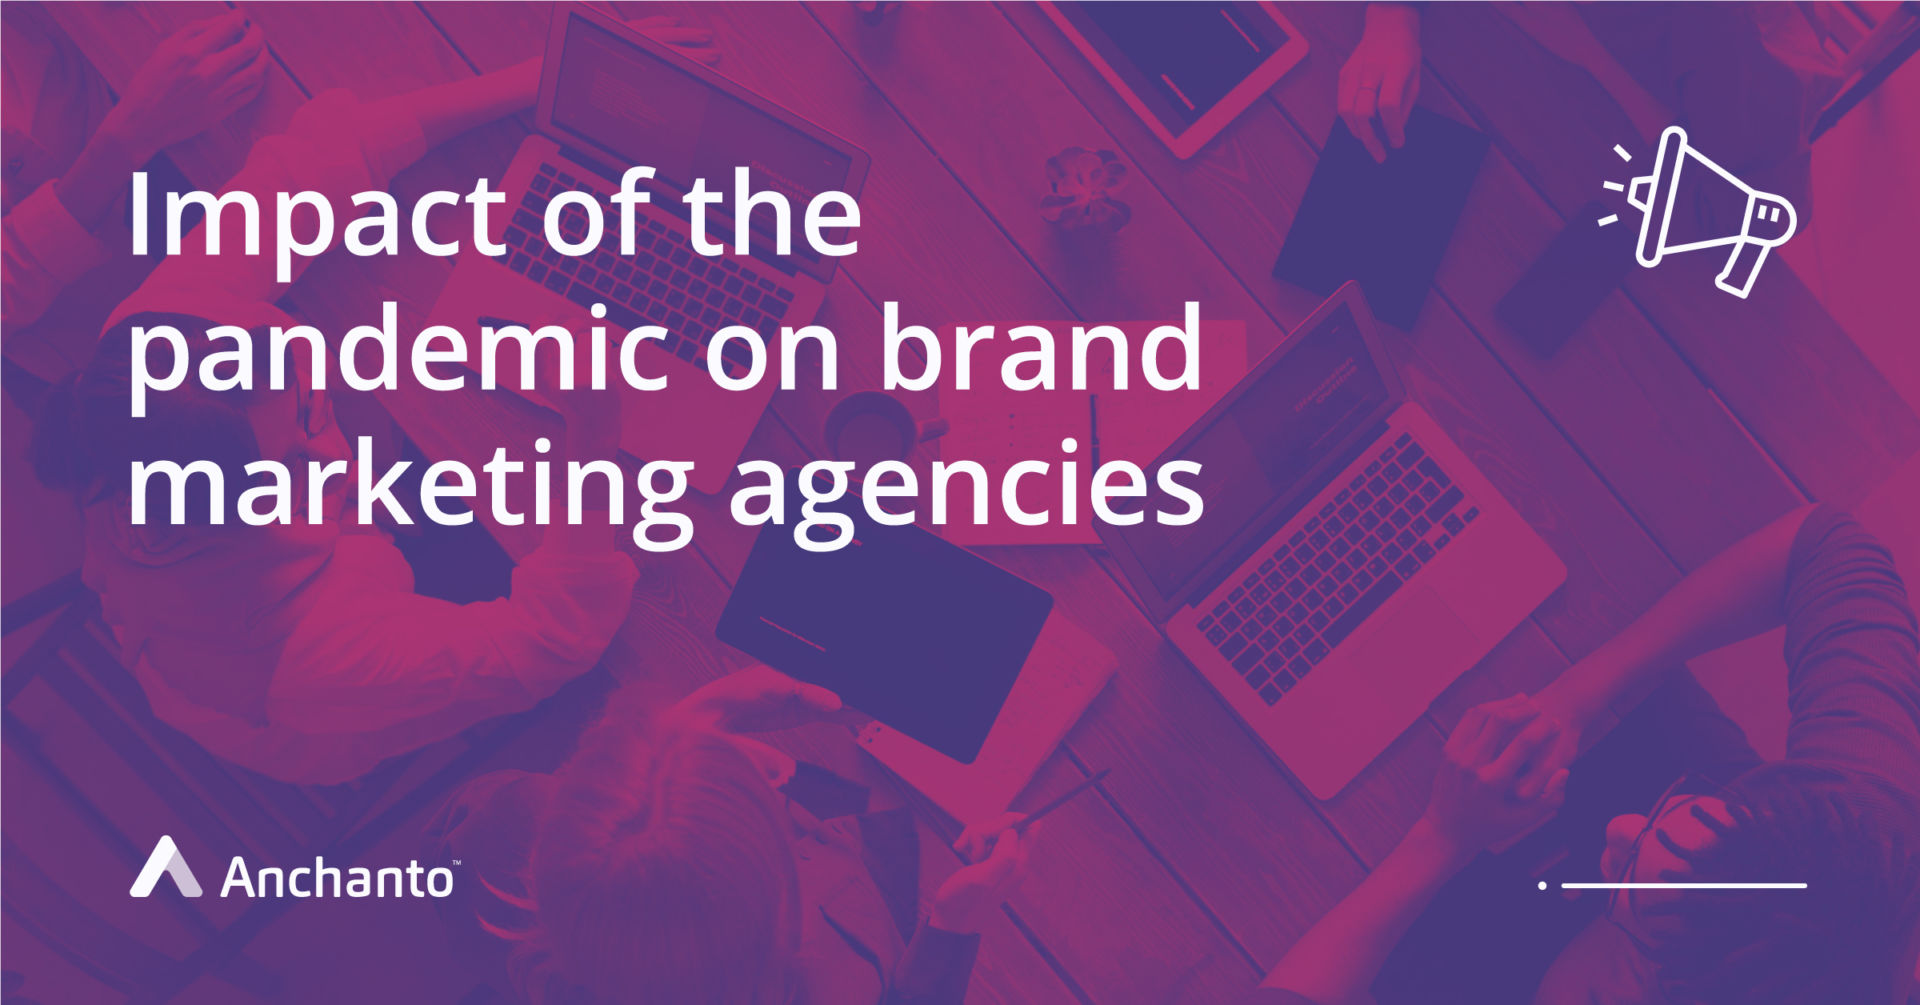 What does the current pandemic mean for brand marketing agencies?